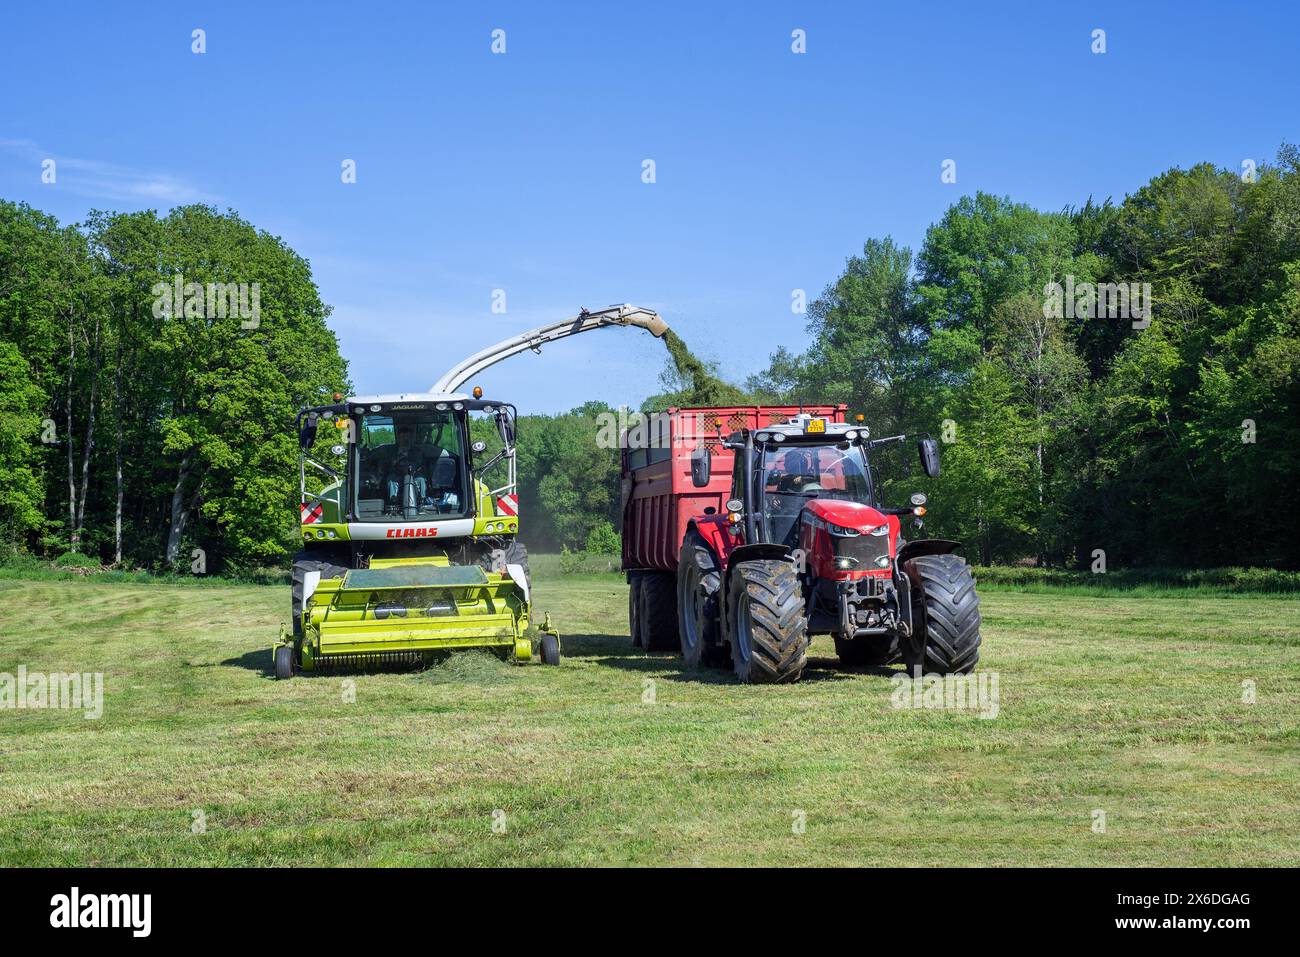 Tractor with trailer running beside Claas Jaguar 870 forage harvester / self-propelled silage chopper harvesting grass from meadow / pasture Stock Photo